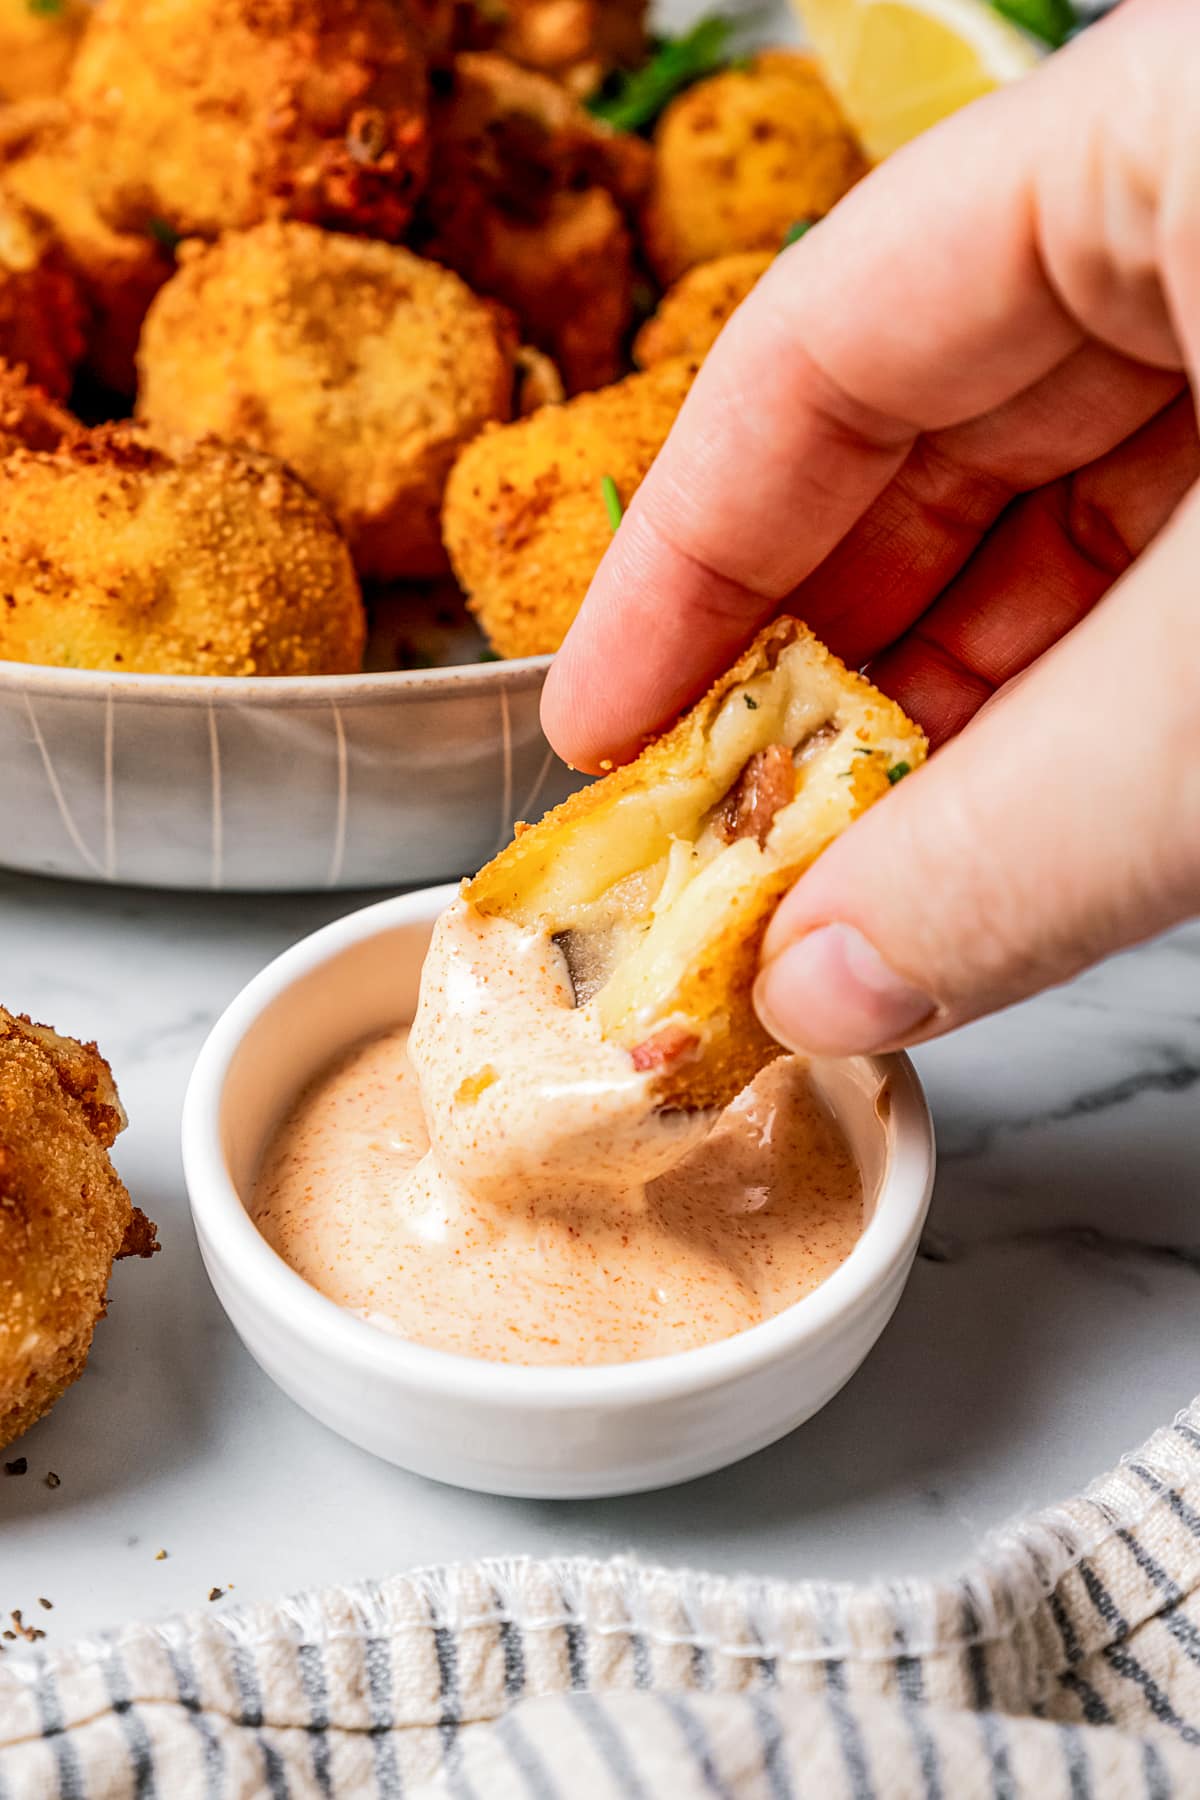 A potato croquette with a bite taken out of it and dipping it into garlic aioli.